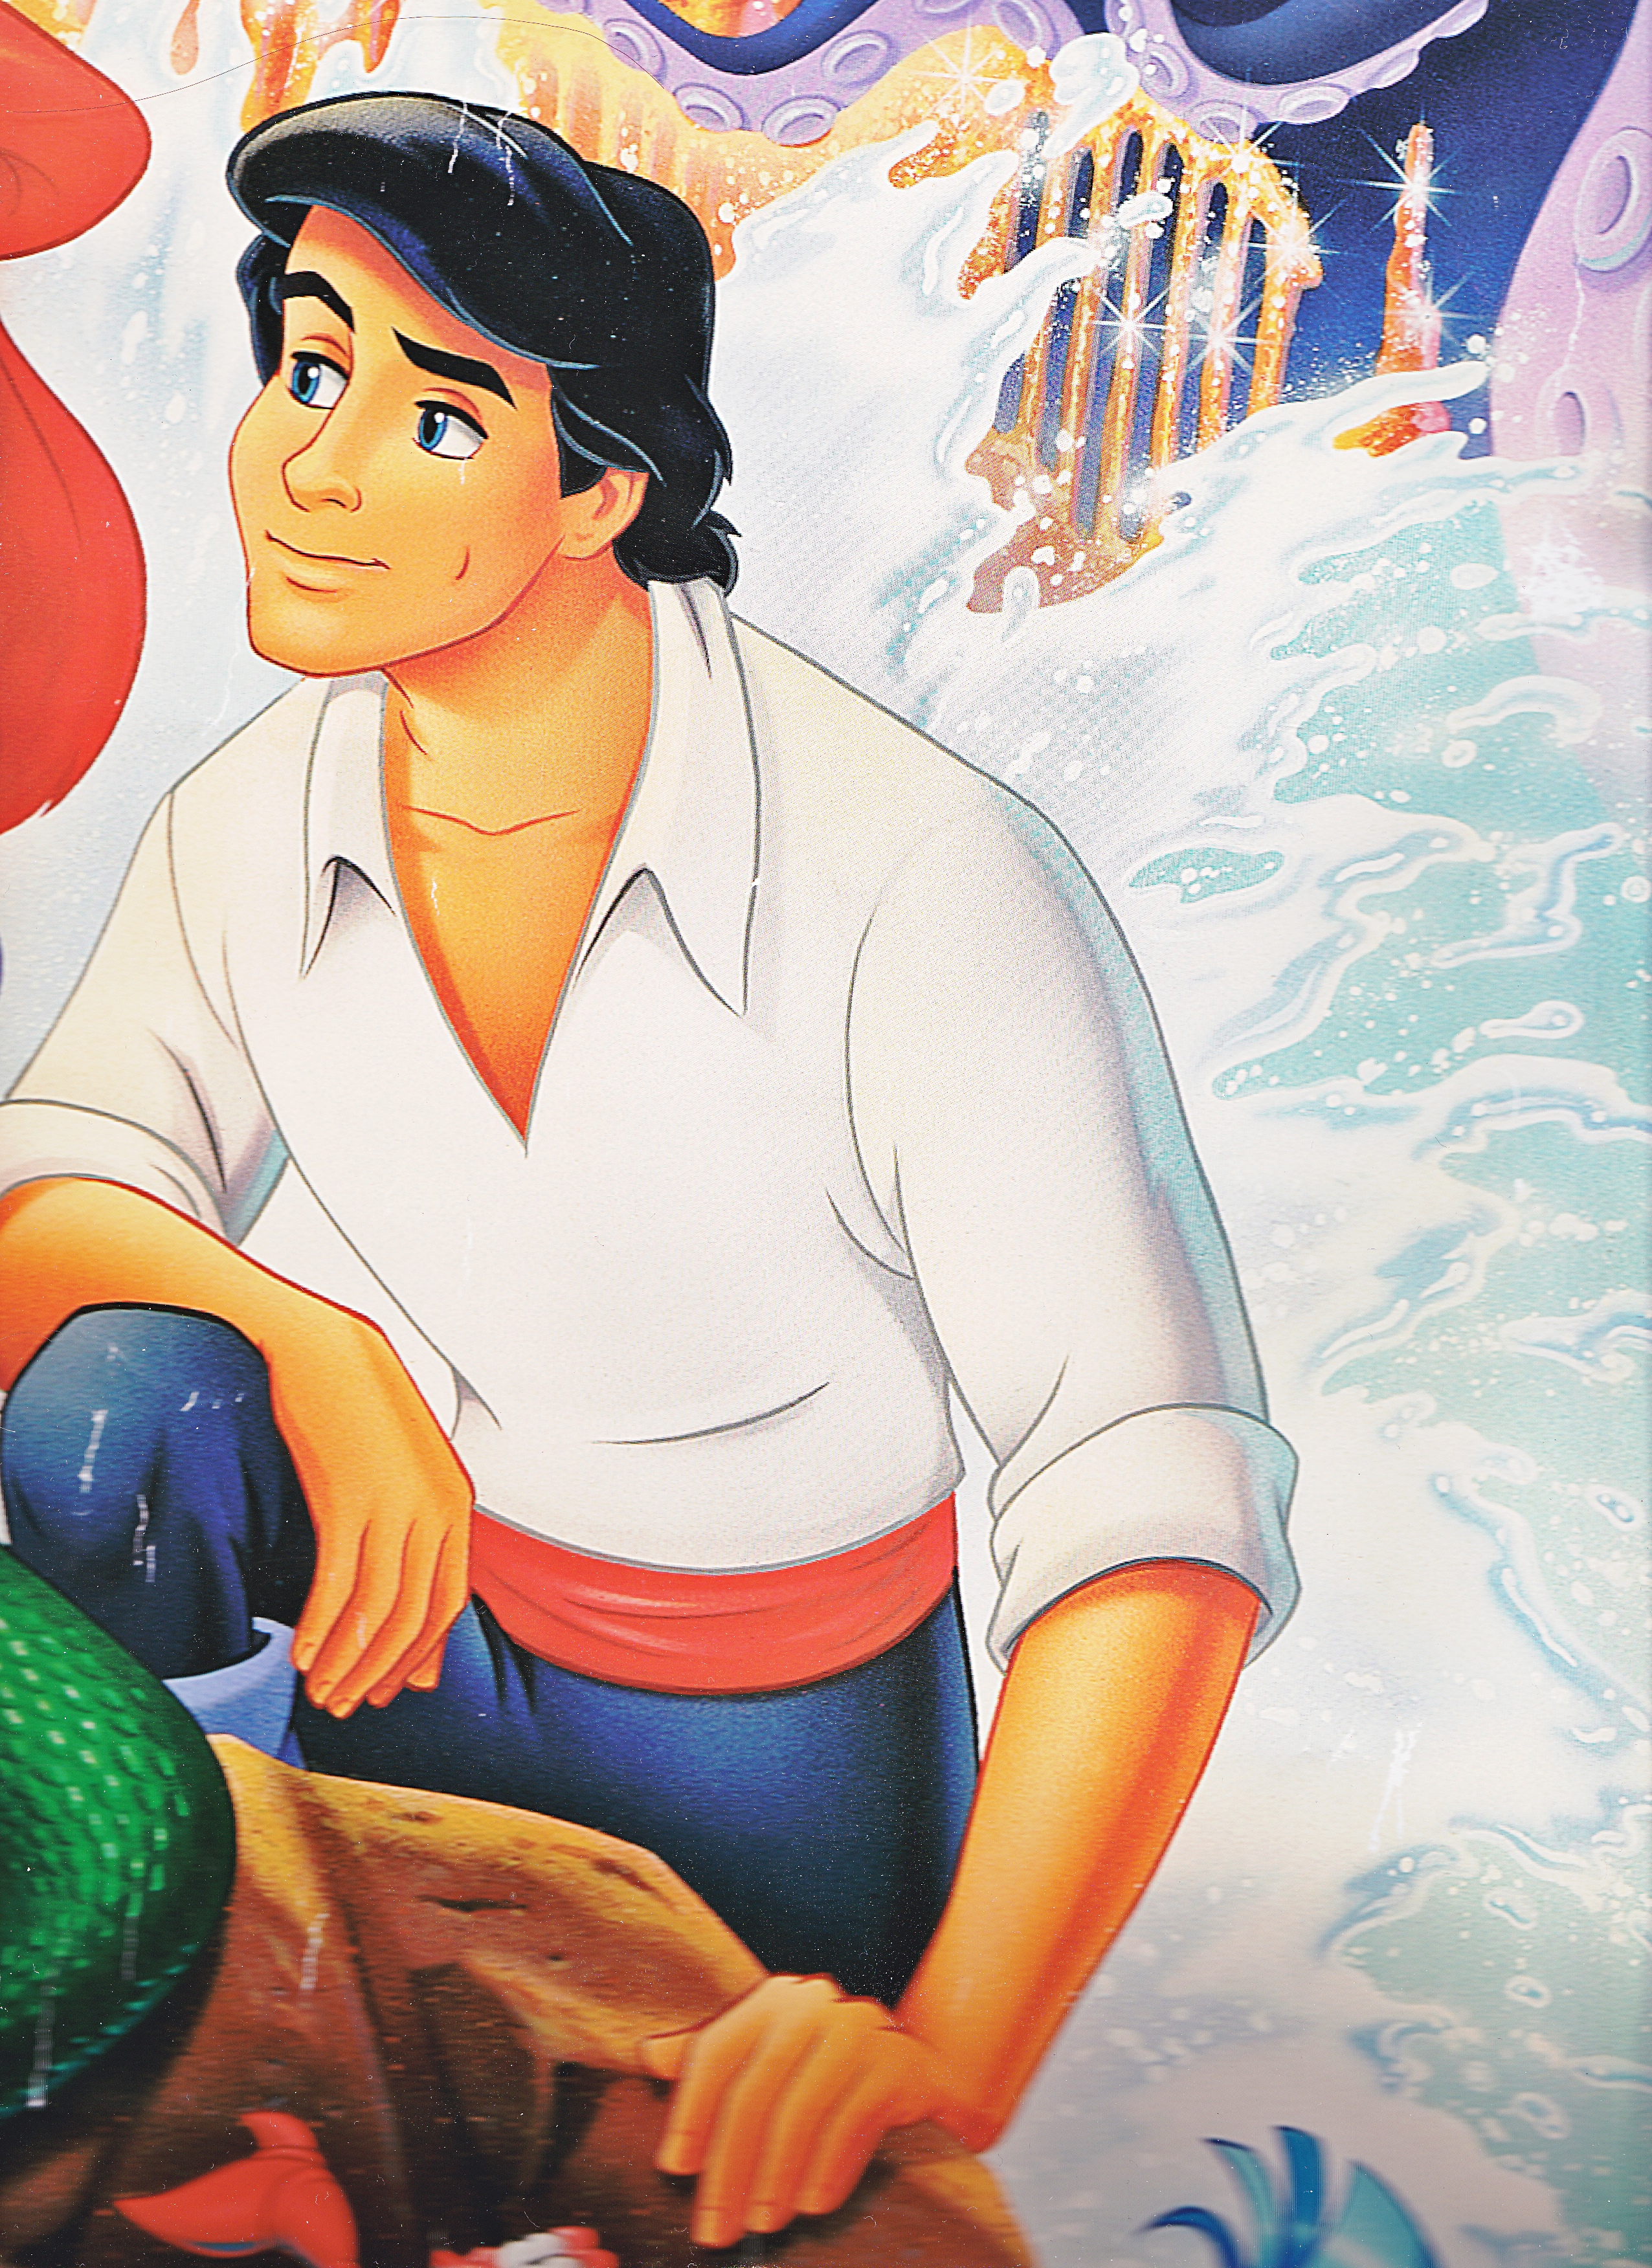 Walt Дисней Image of Prince Eric from "The Little Mermaid" (1989)...